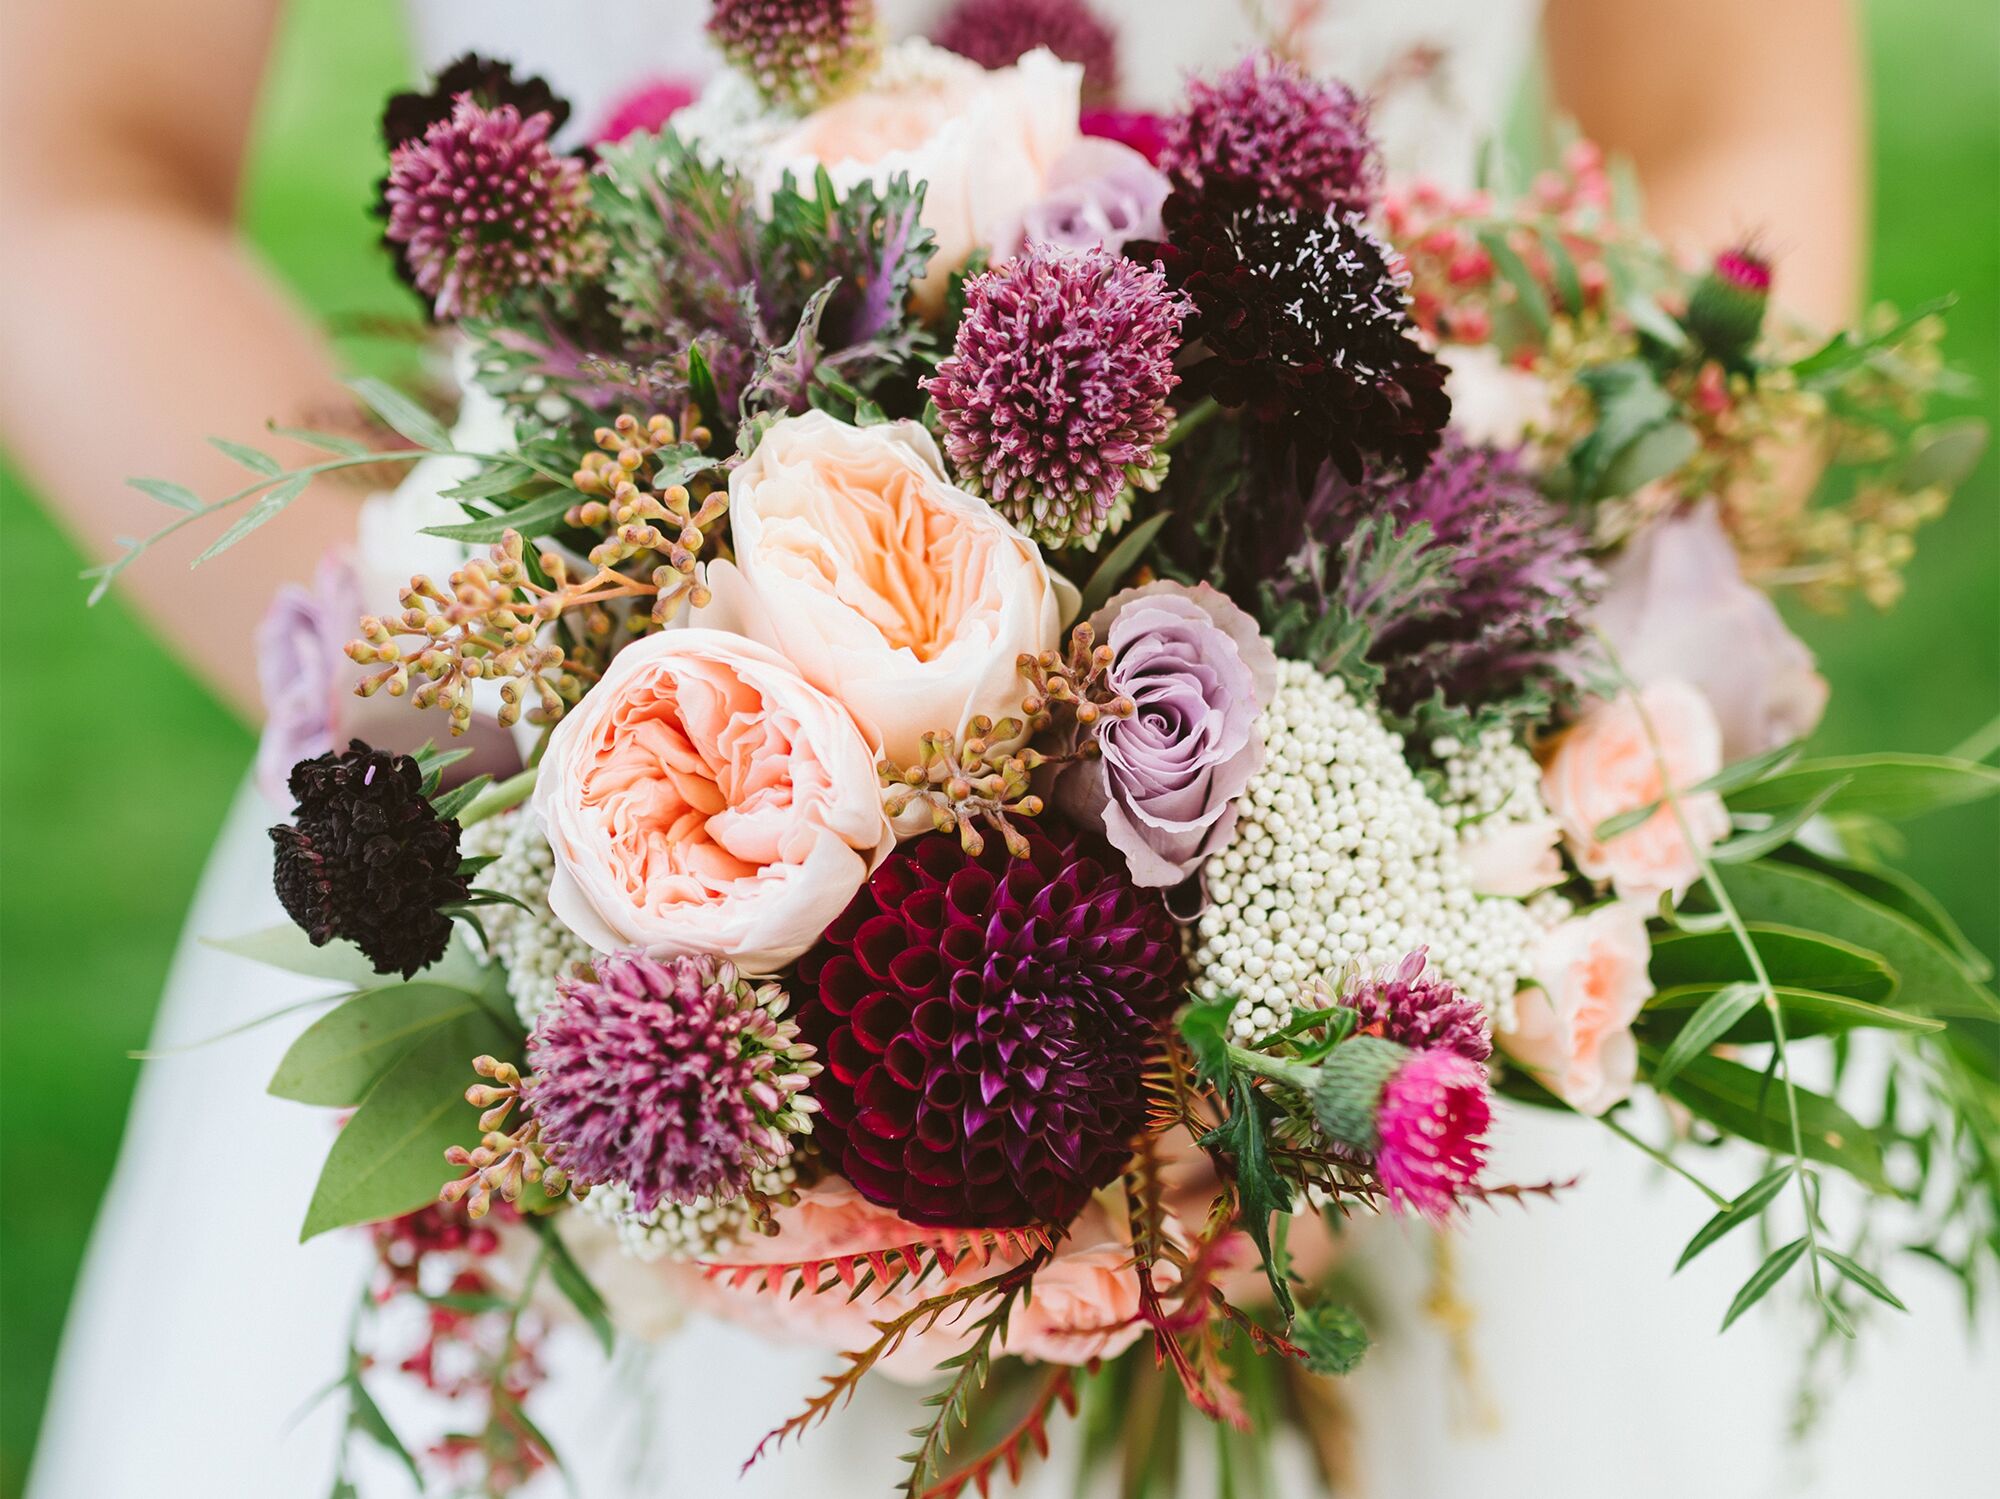 Wedding Flowers Symbolic Meanings Of Flowers